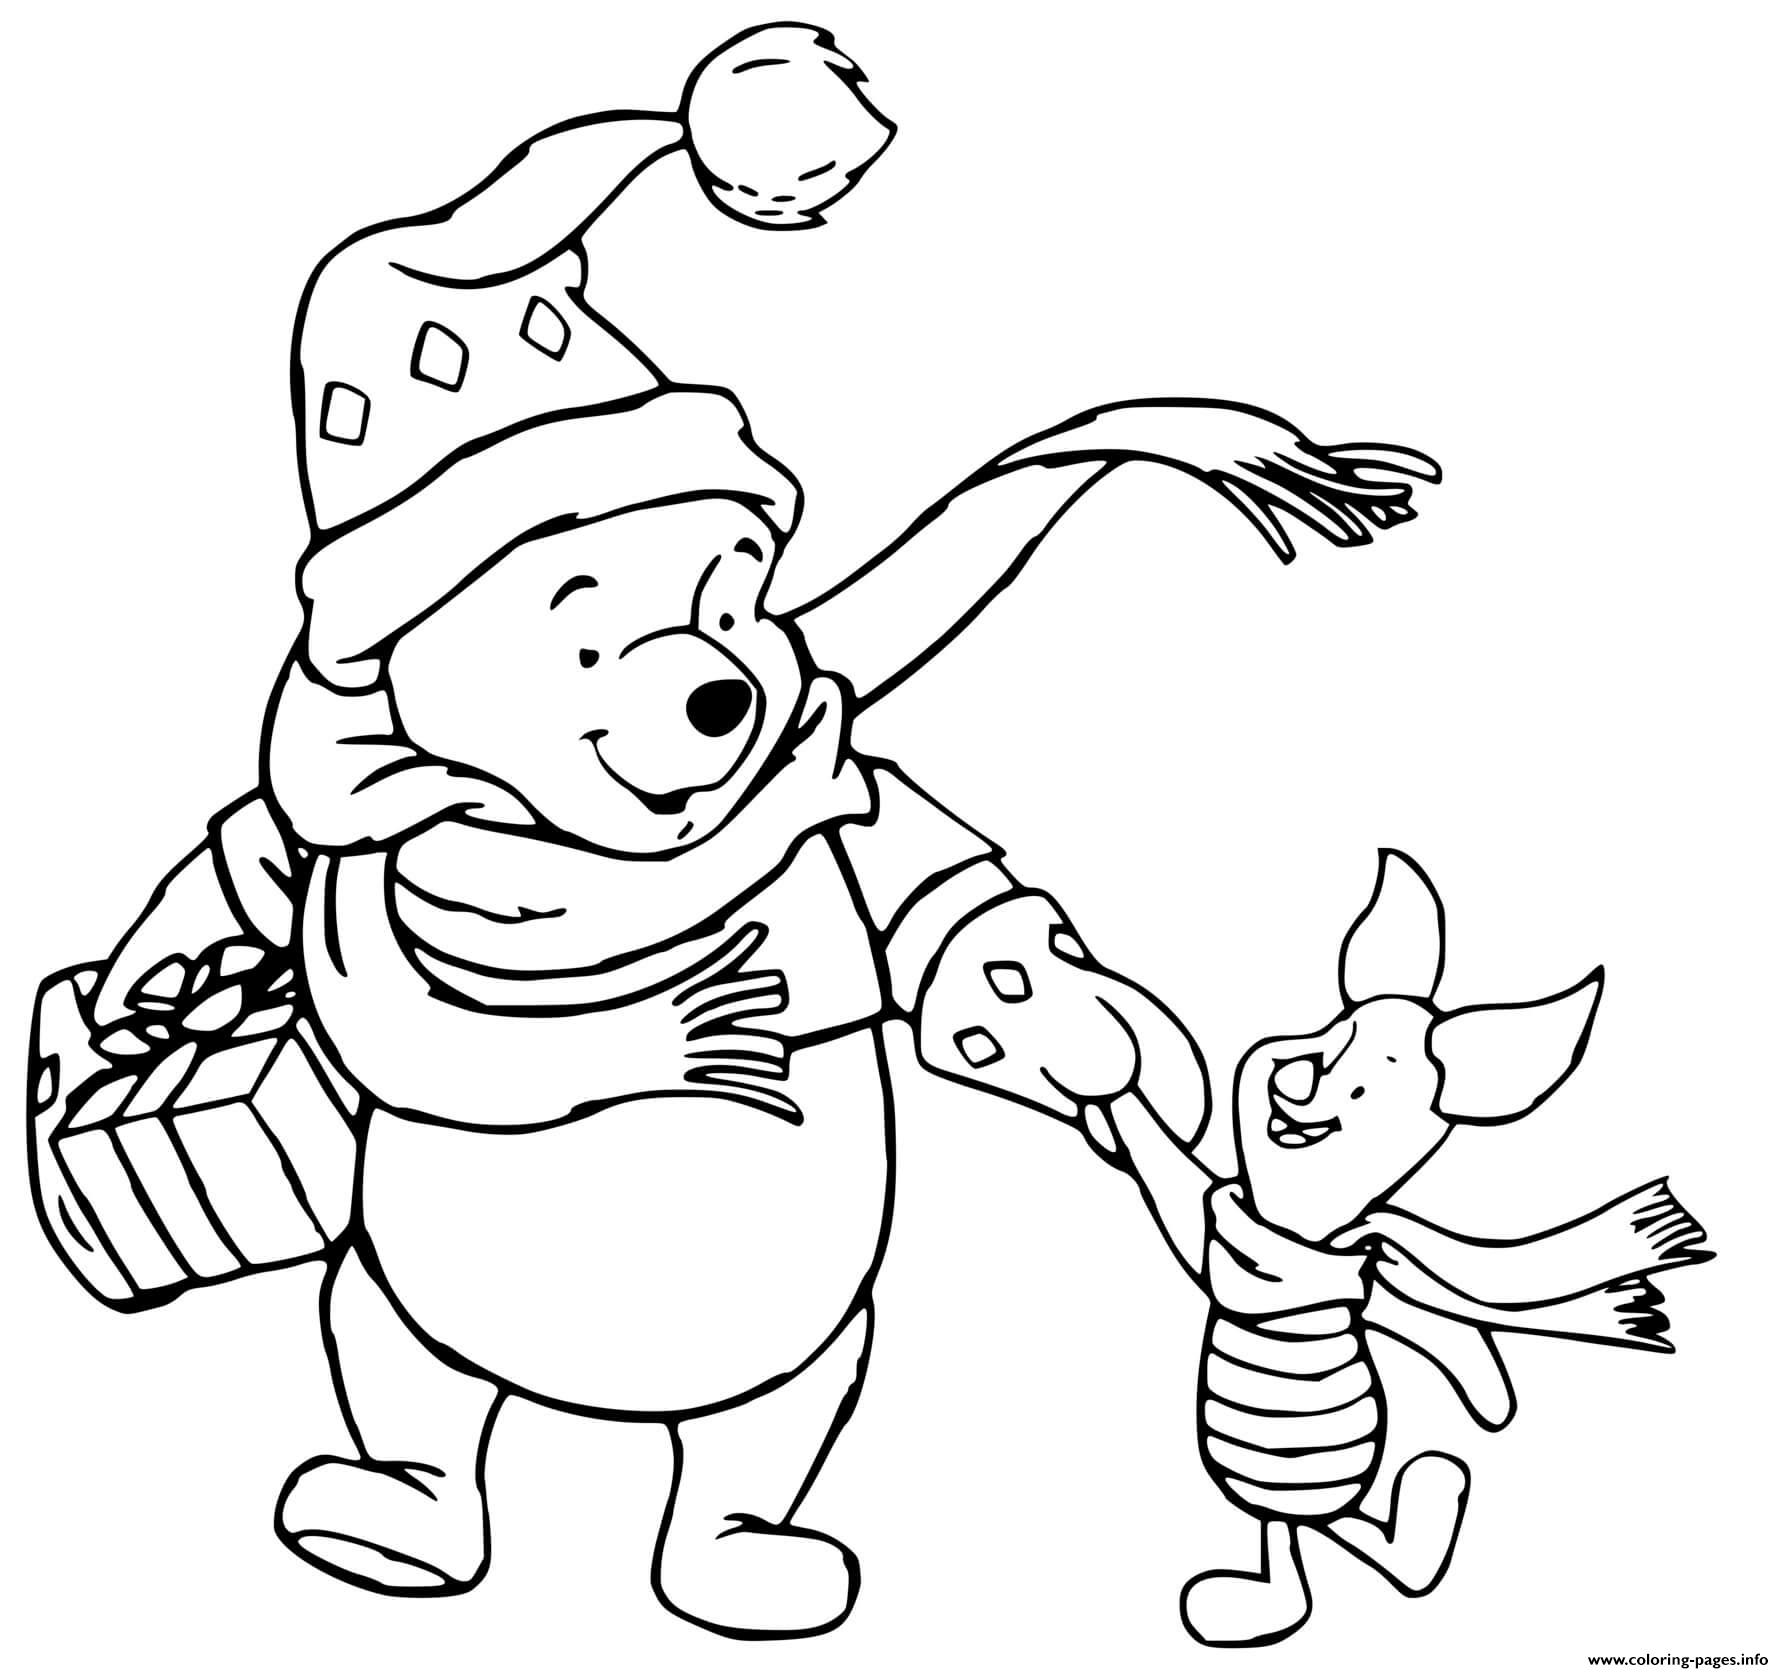 Pooh Piglet Hand In Hand coloring